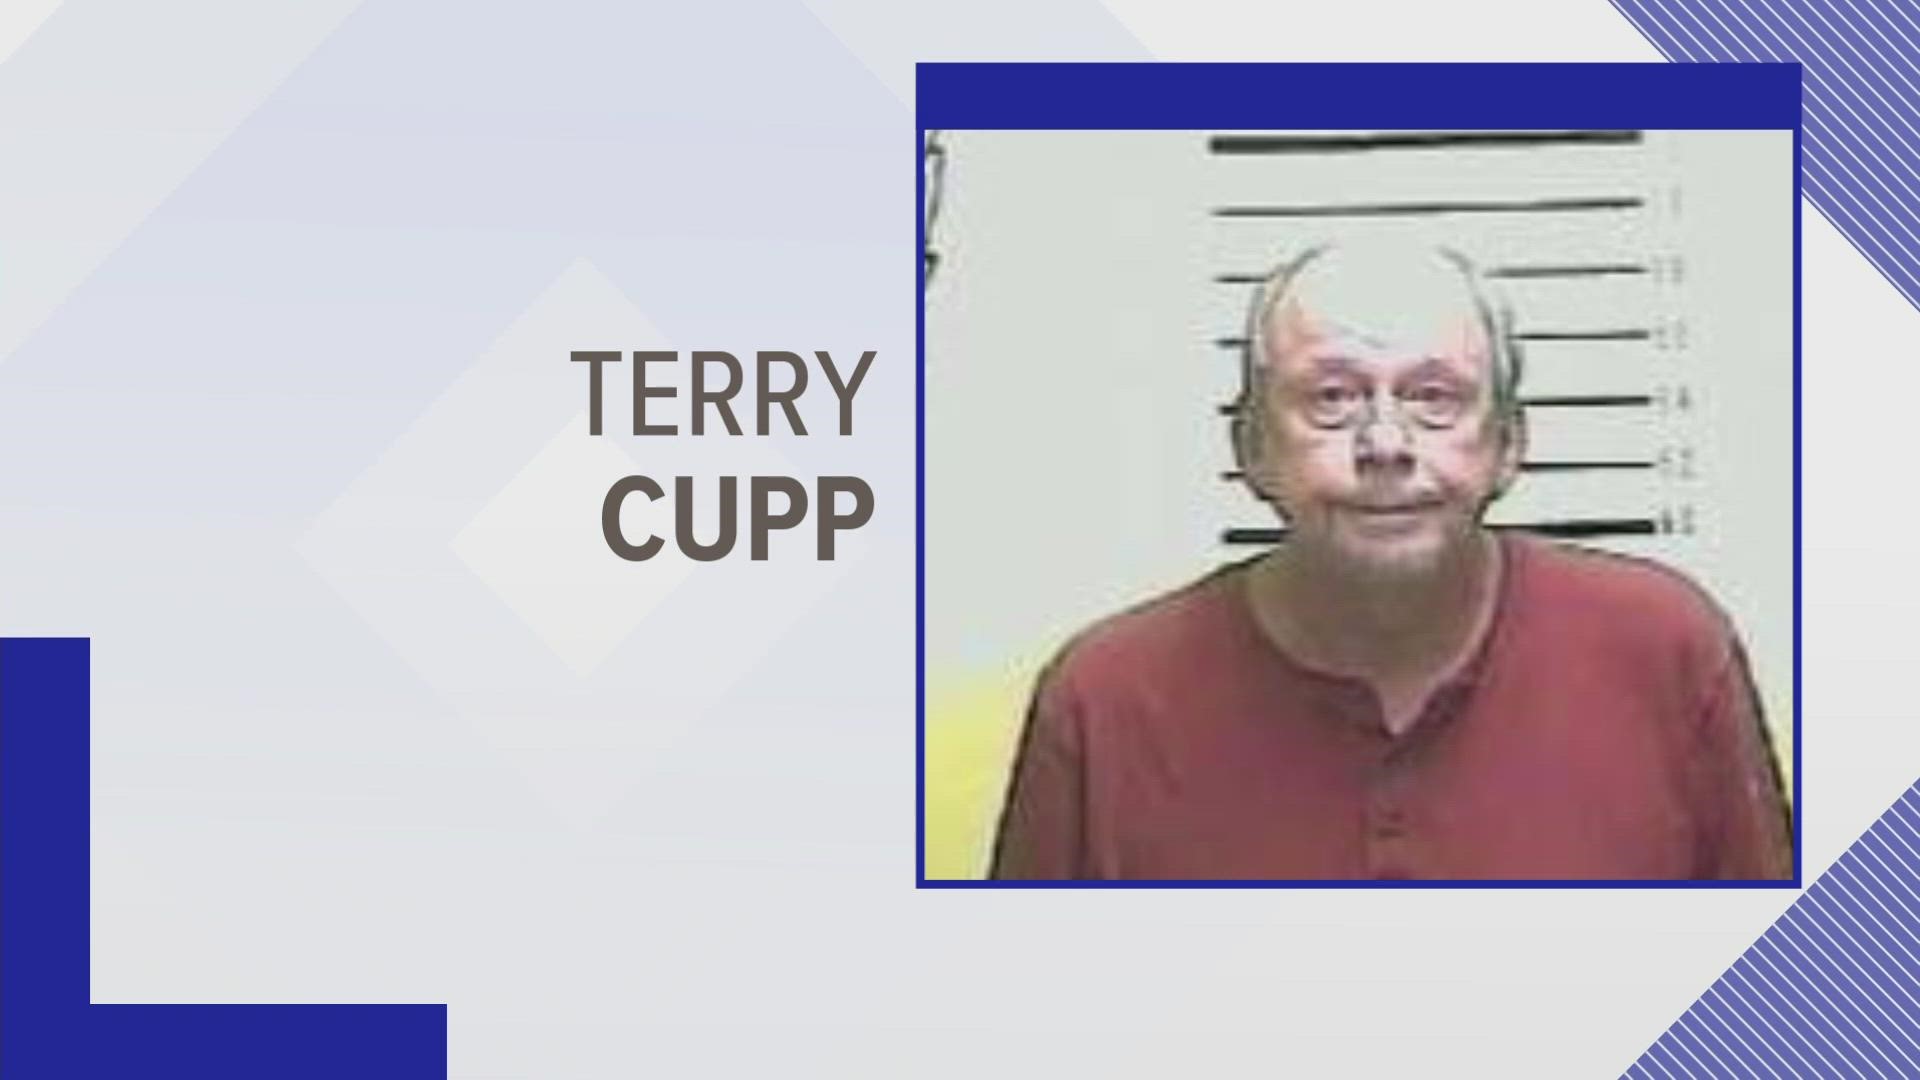 Terry Cupp was charged with sexual abuse following two incidents involving a child.